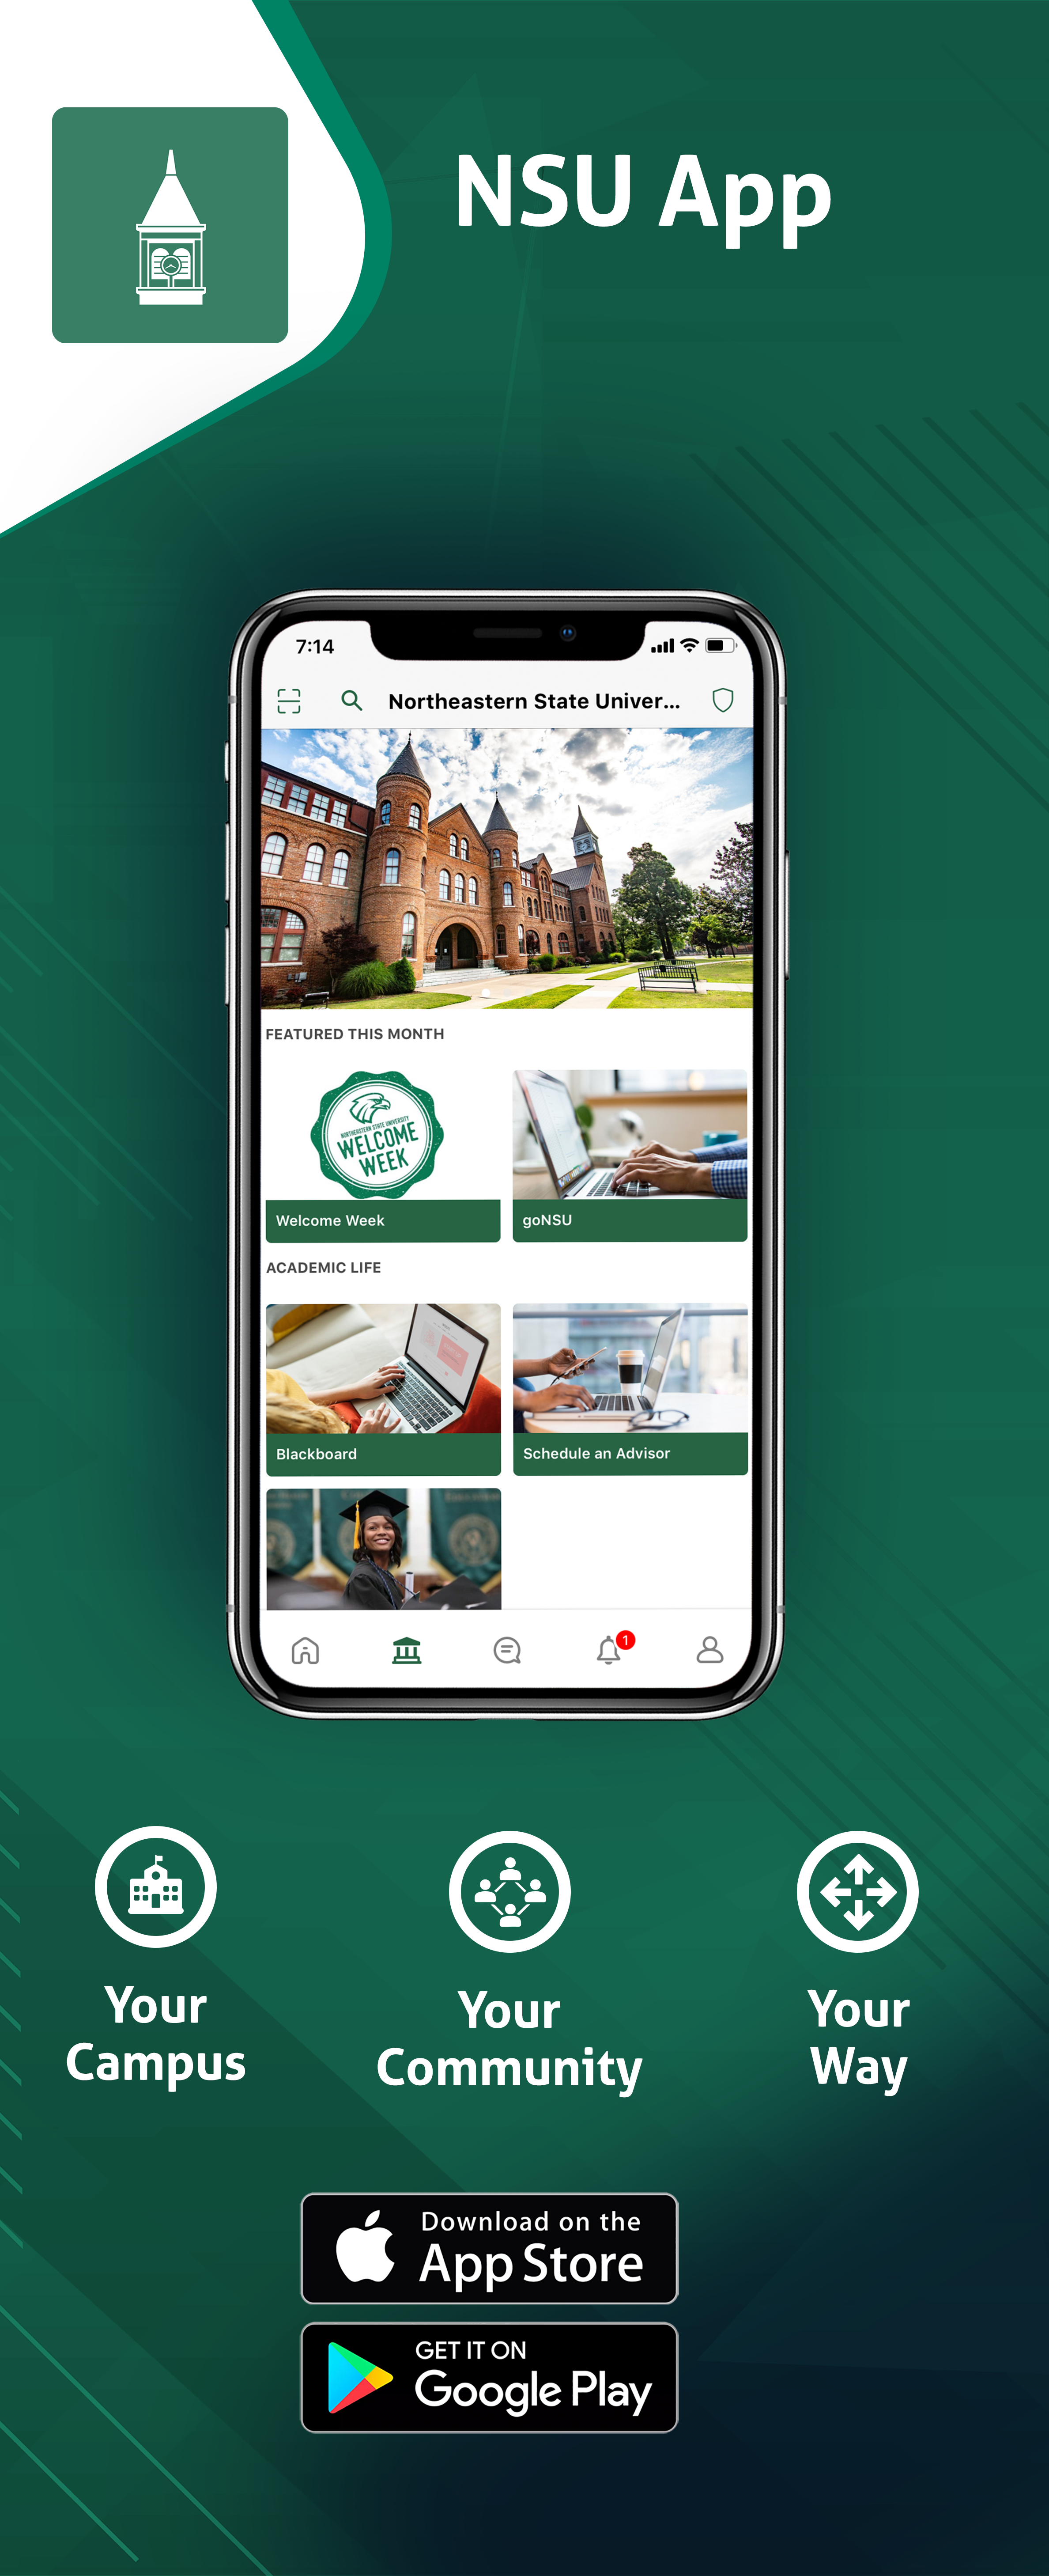 Campus App now available